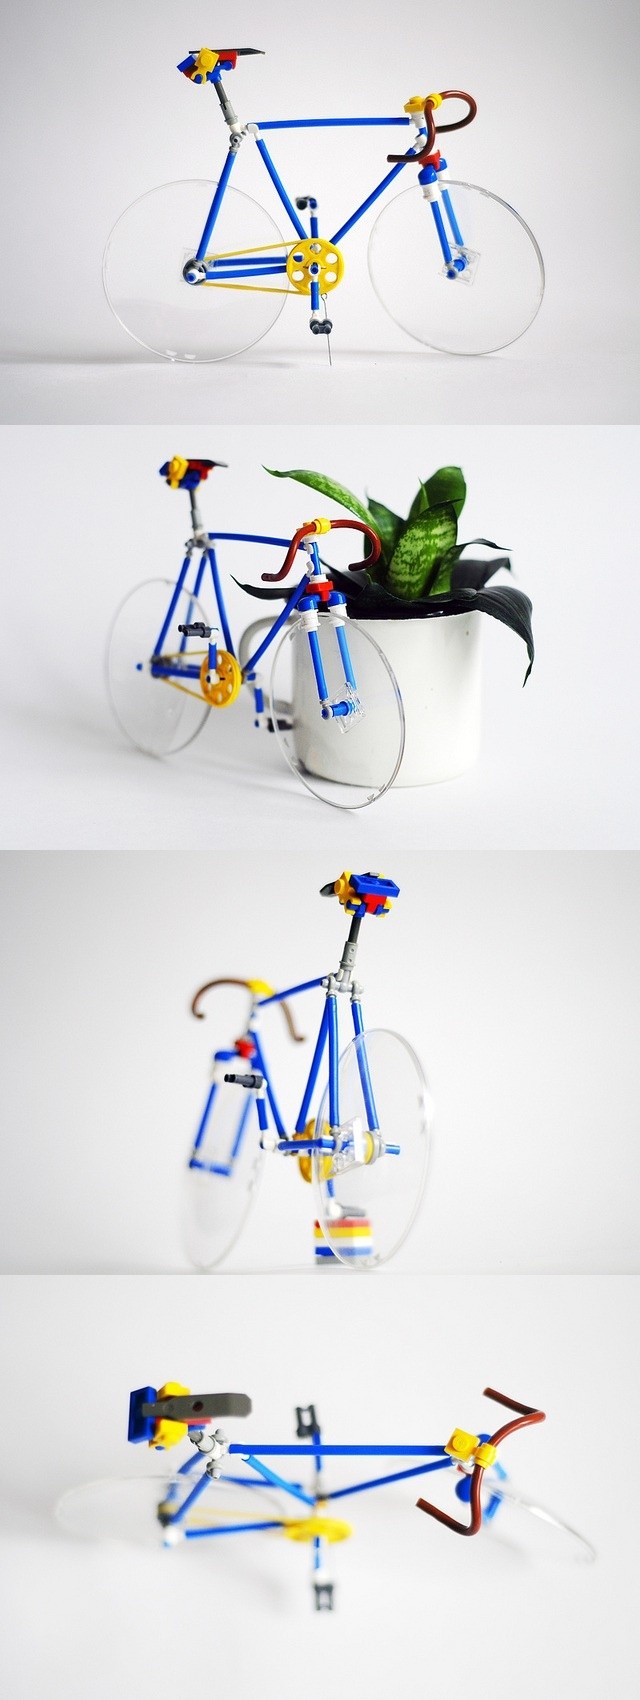 Lego Bicycle - Fix from Moscow!